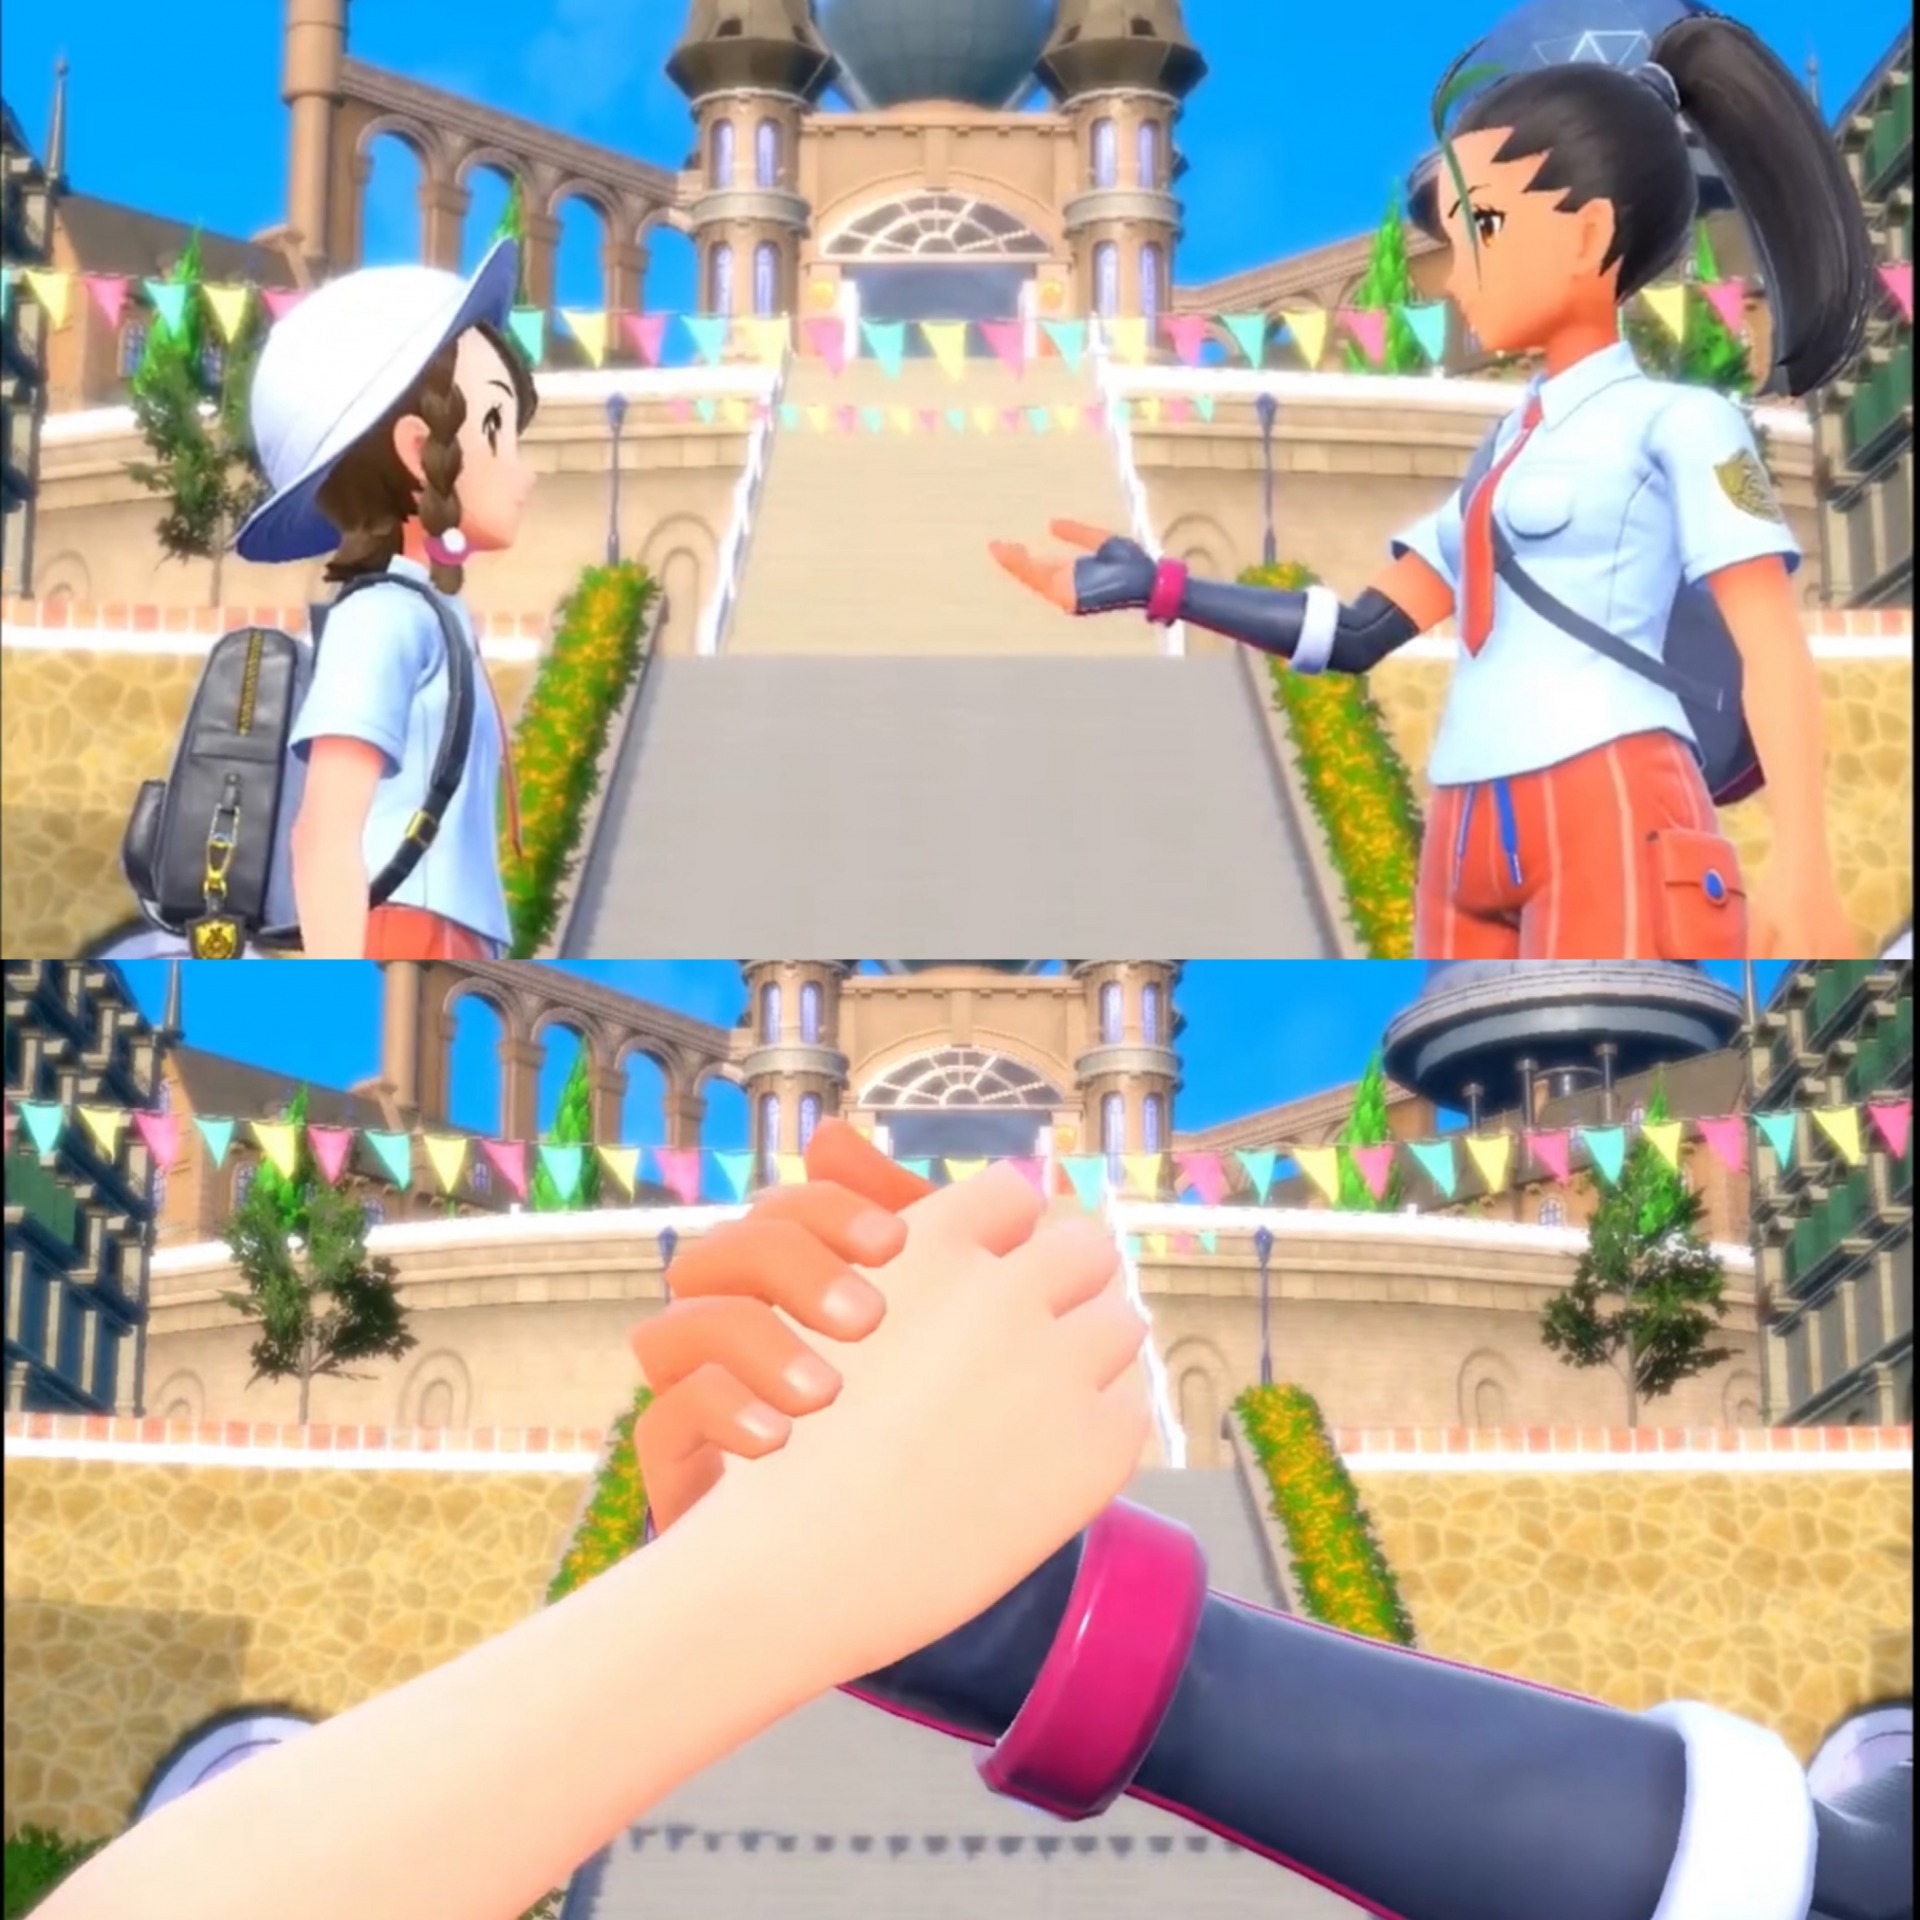 High Quality Nemona handshaking with the protagonist/player character Blank Meme Template